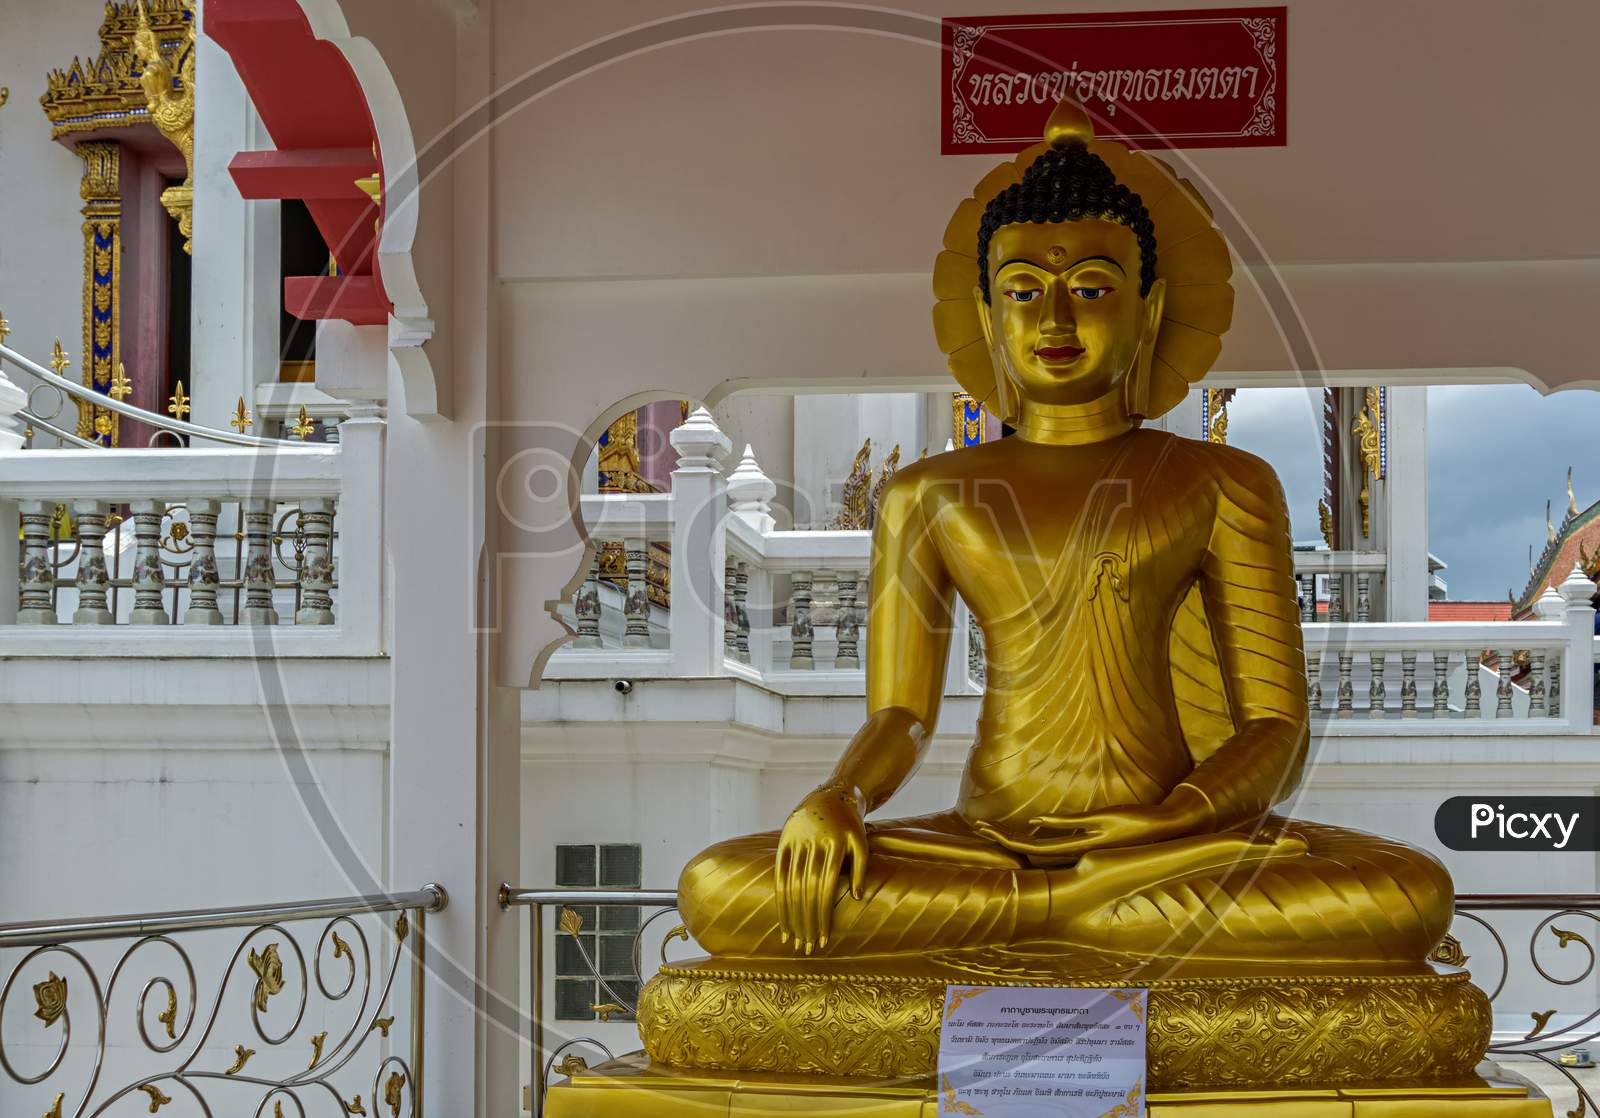 Pattaya,Thailand - April 17,2018: South Pattaya Road This Is A Golden Statue,Which Presents Buddha.The Statue Is In Front Of A Wat.